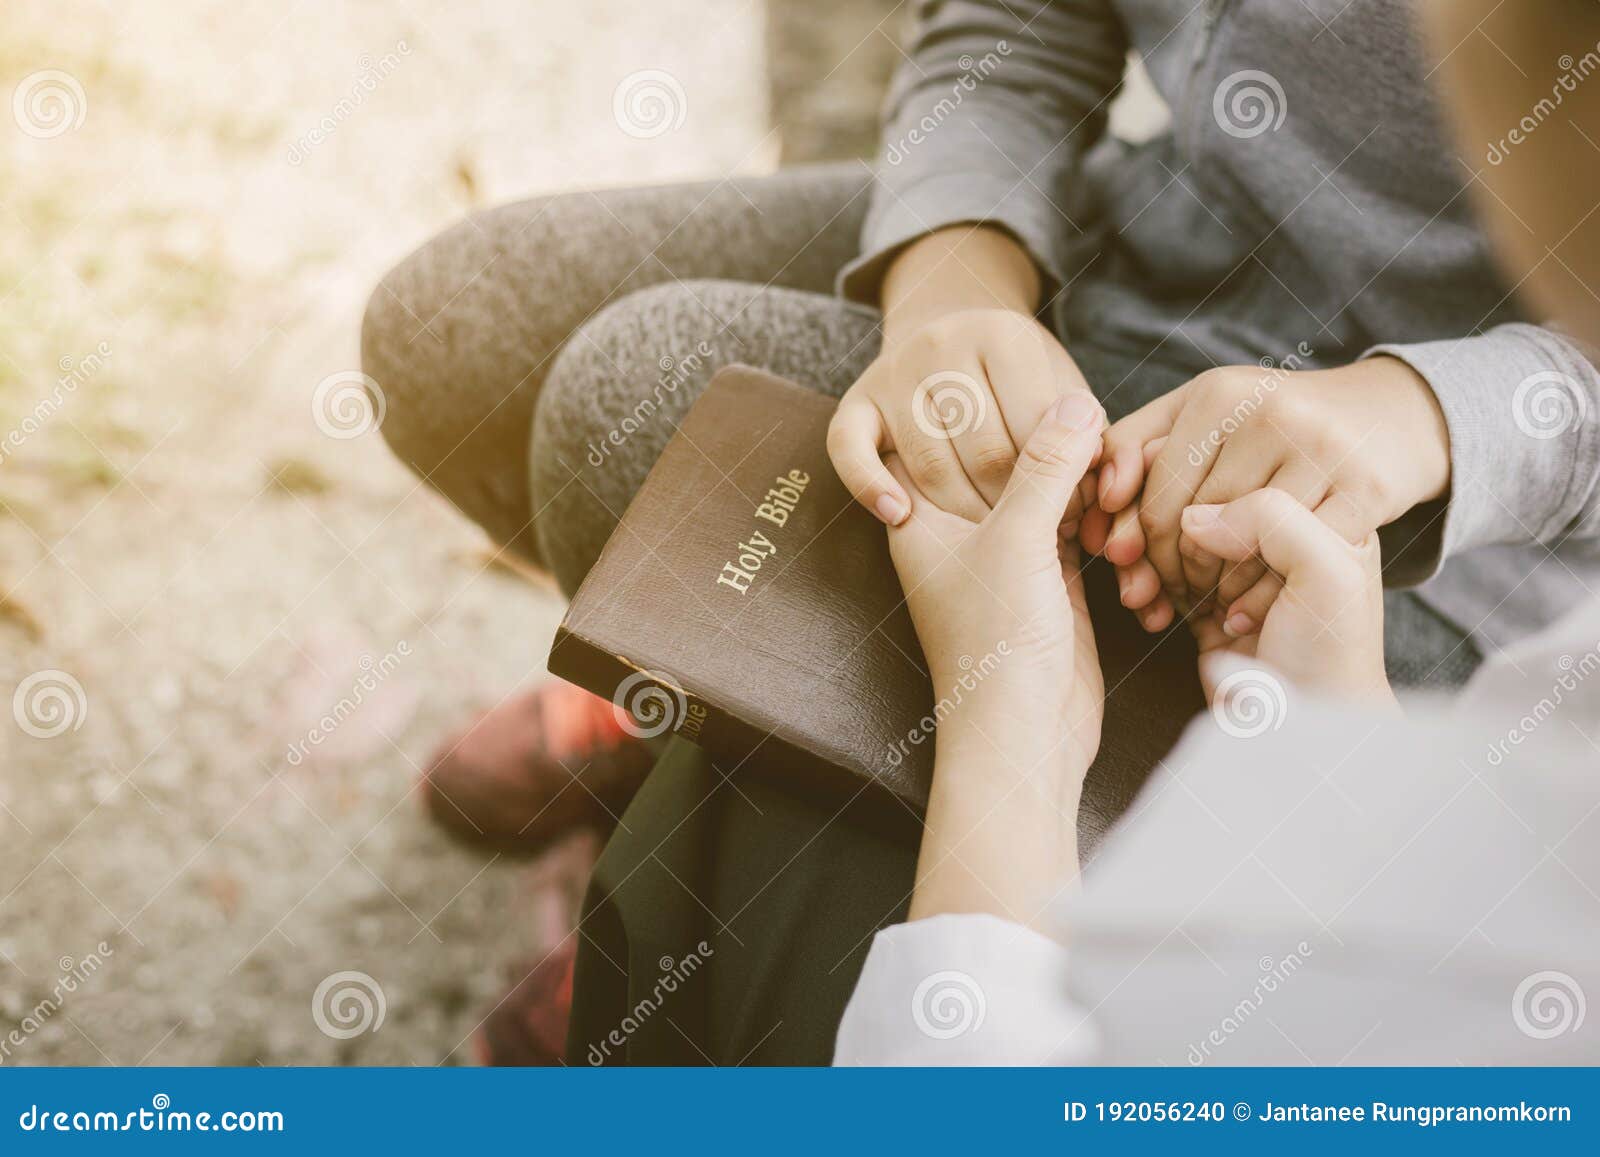 two women pray on the bible